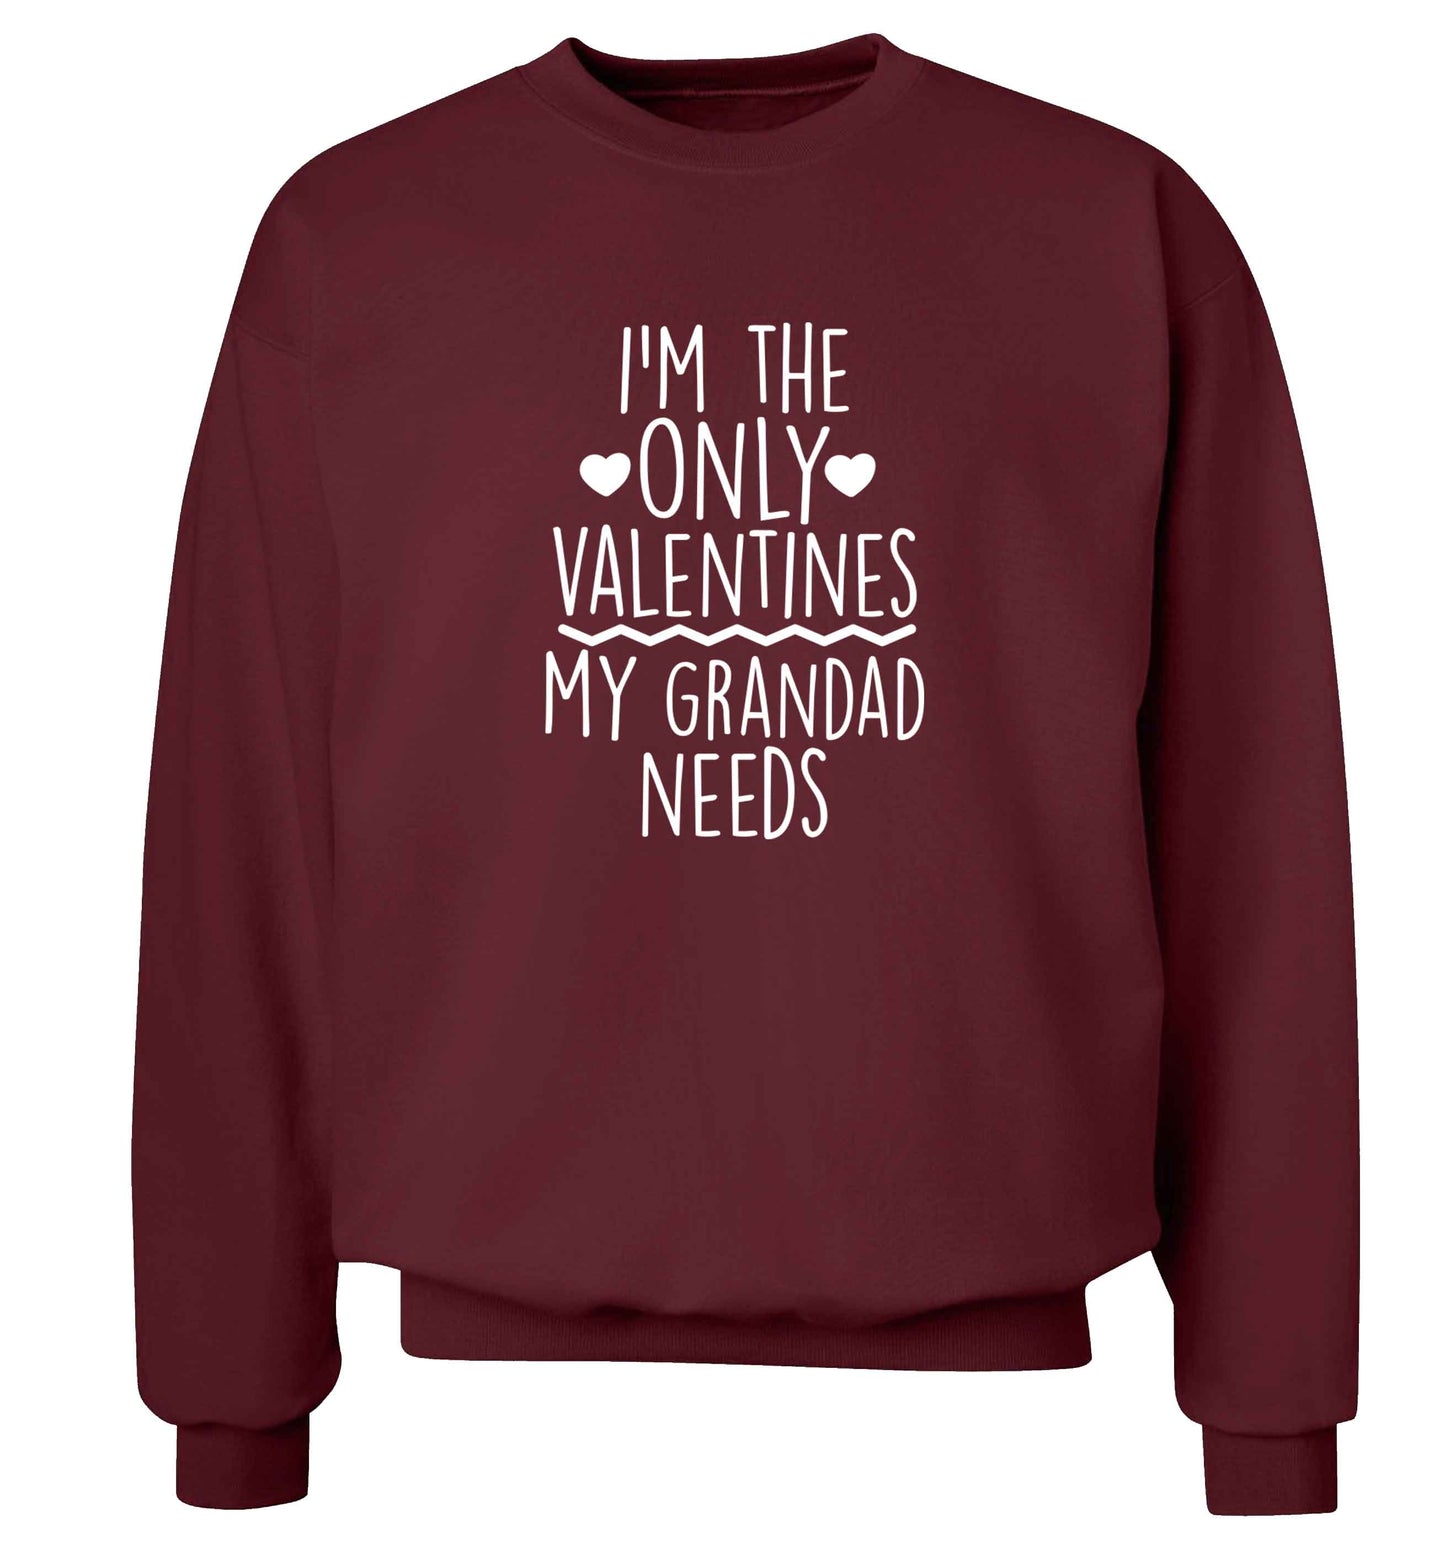 I'm the only valentines my grandad needs adult's unisex maroon sweater 2XL